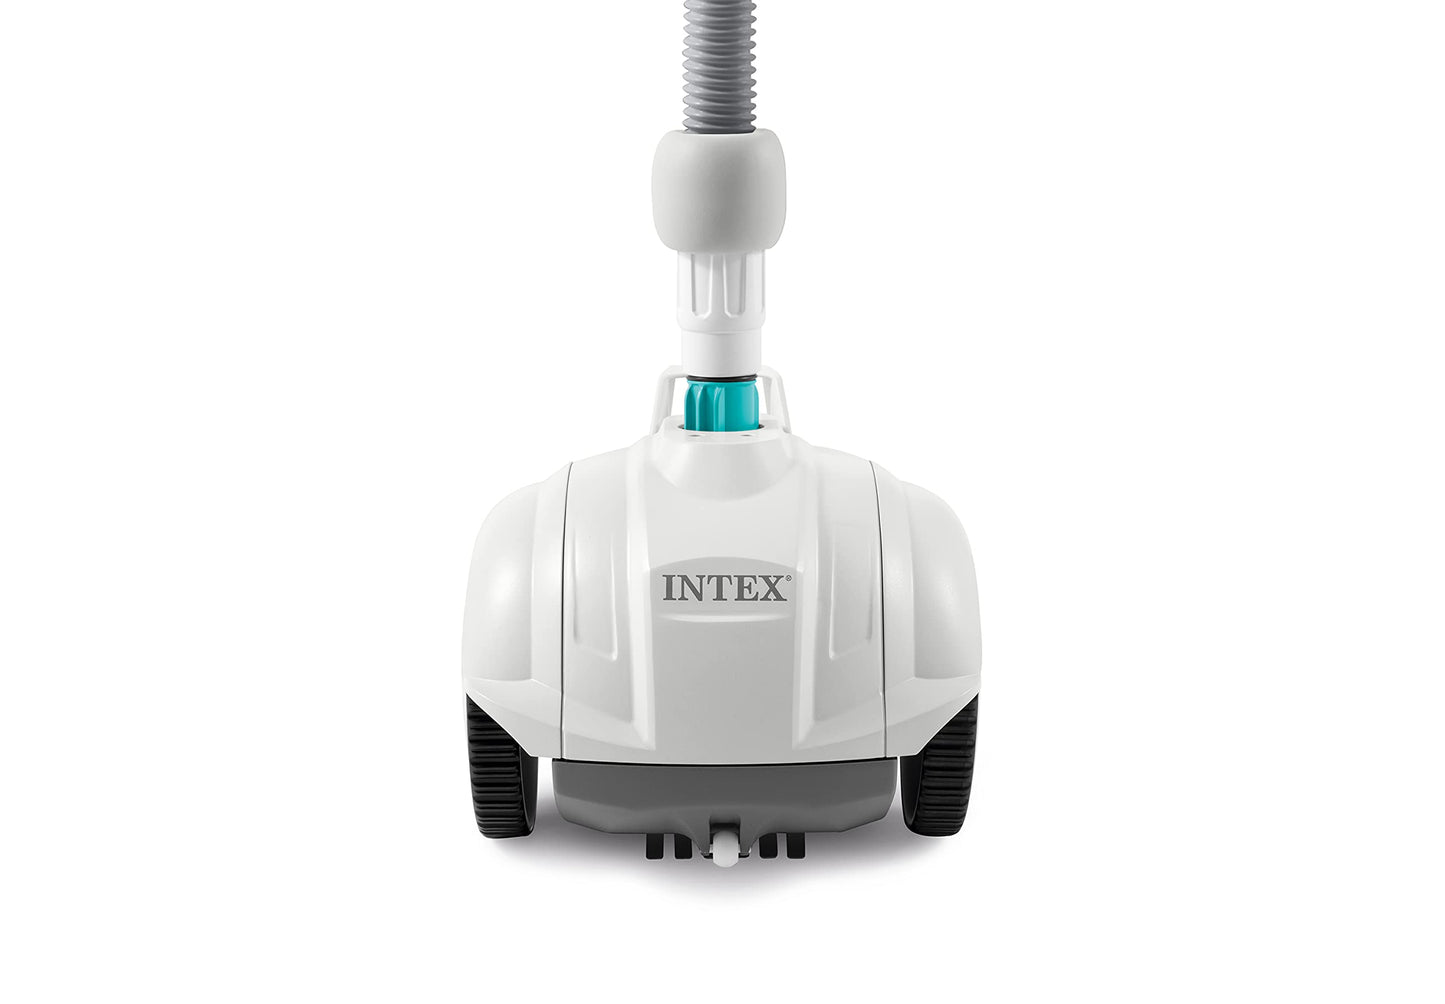 Intex ZX50 Automatic Pool Cleaner, Gray